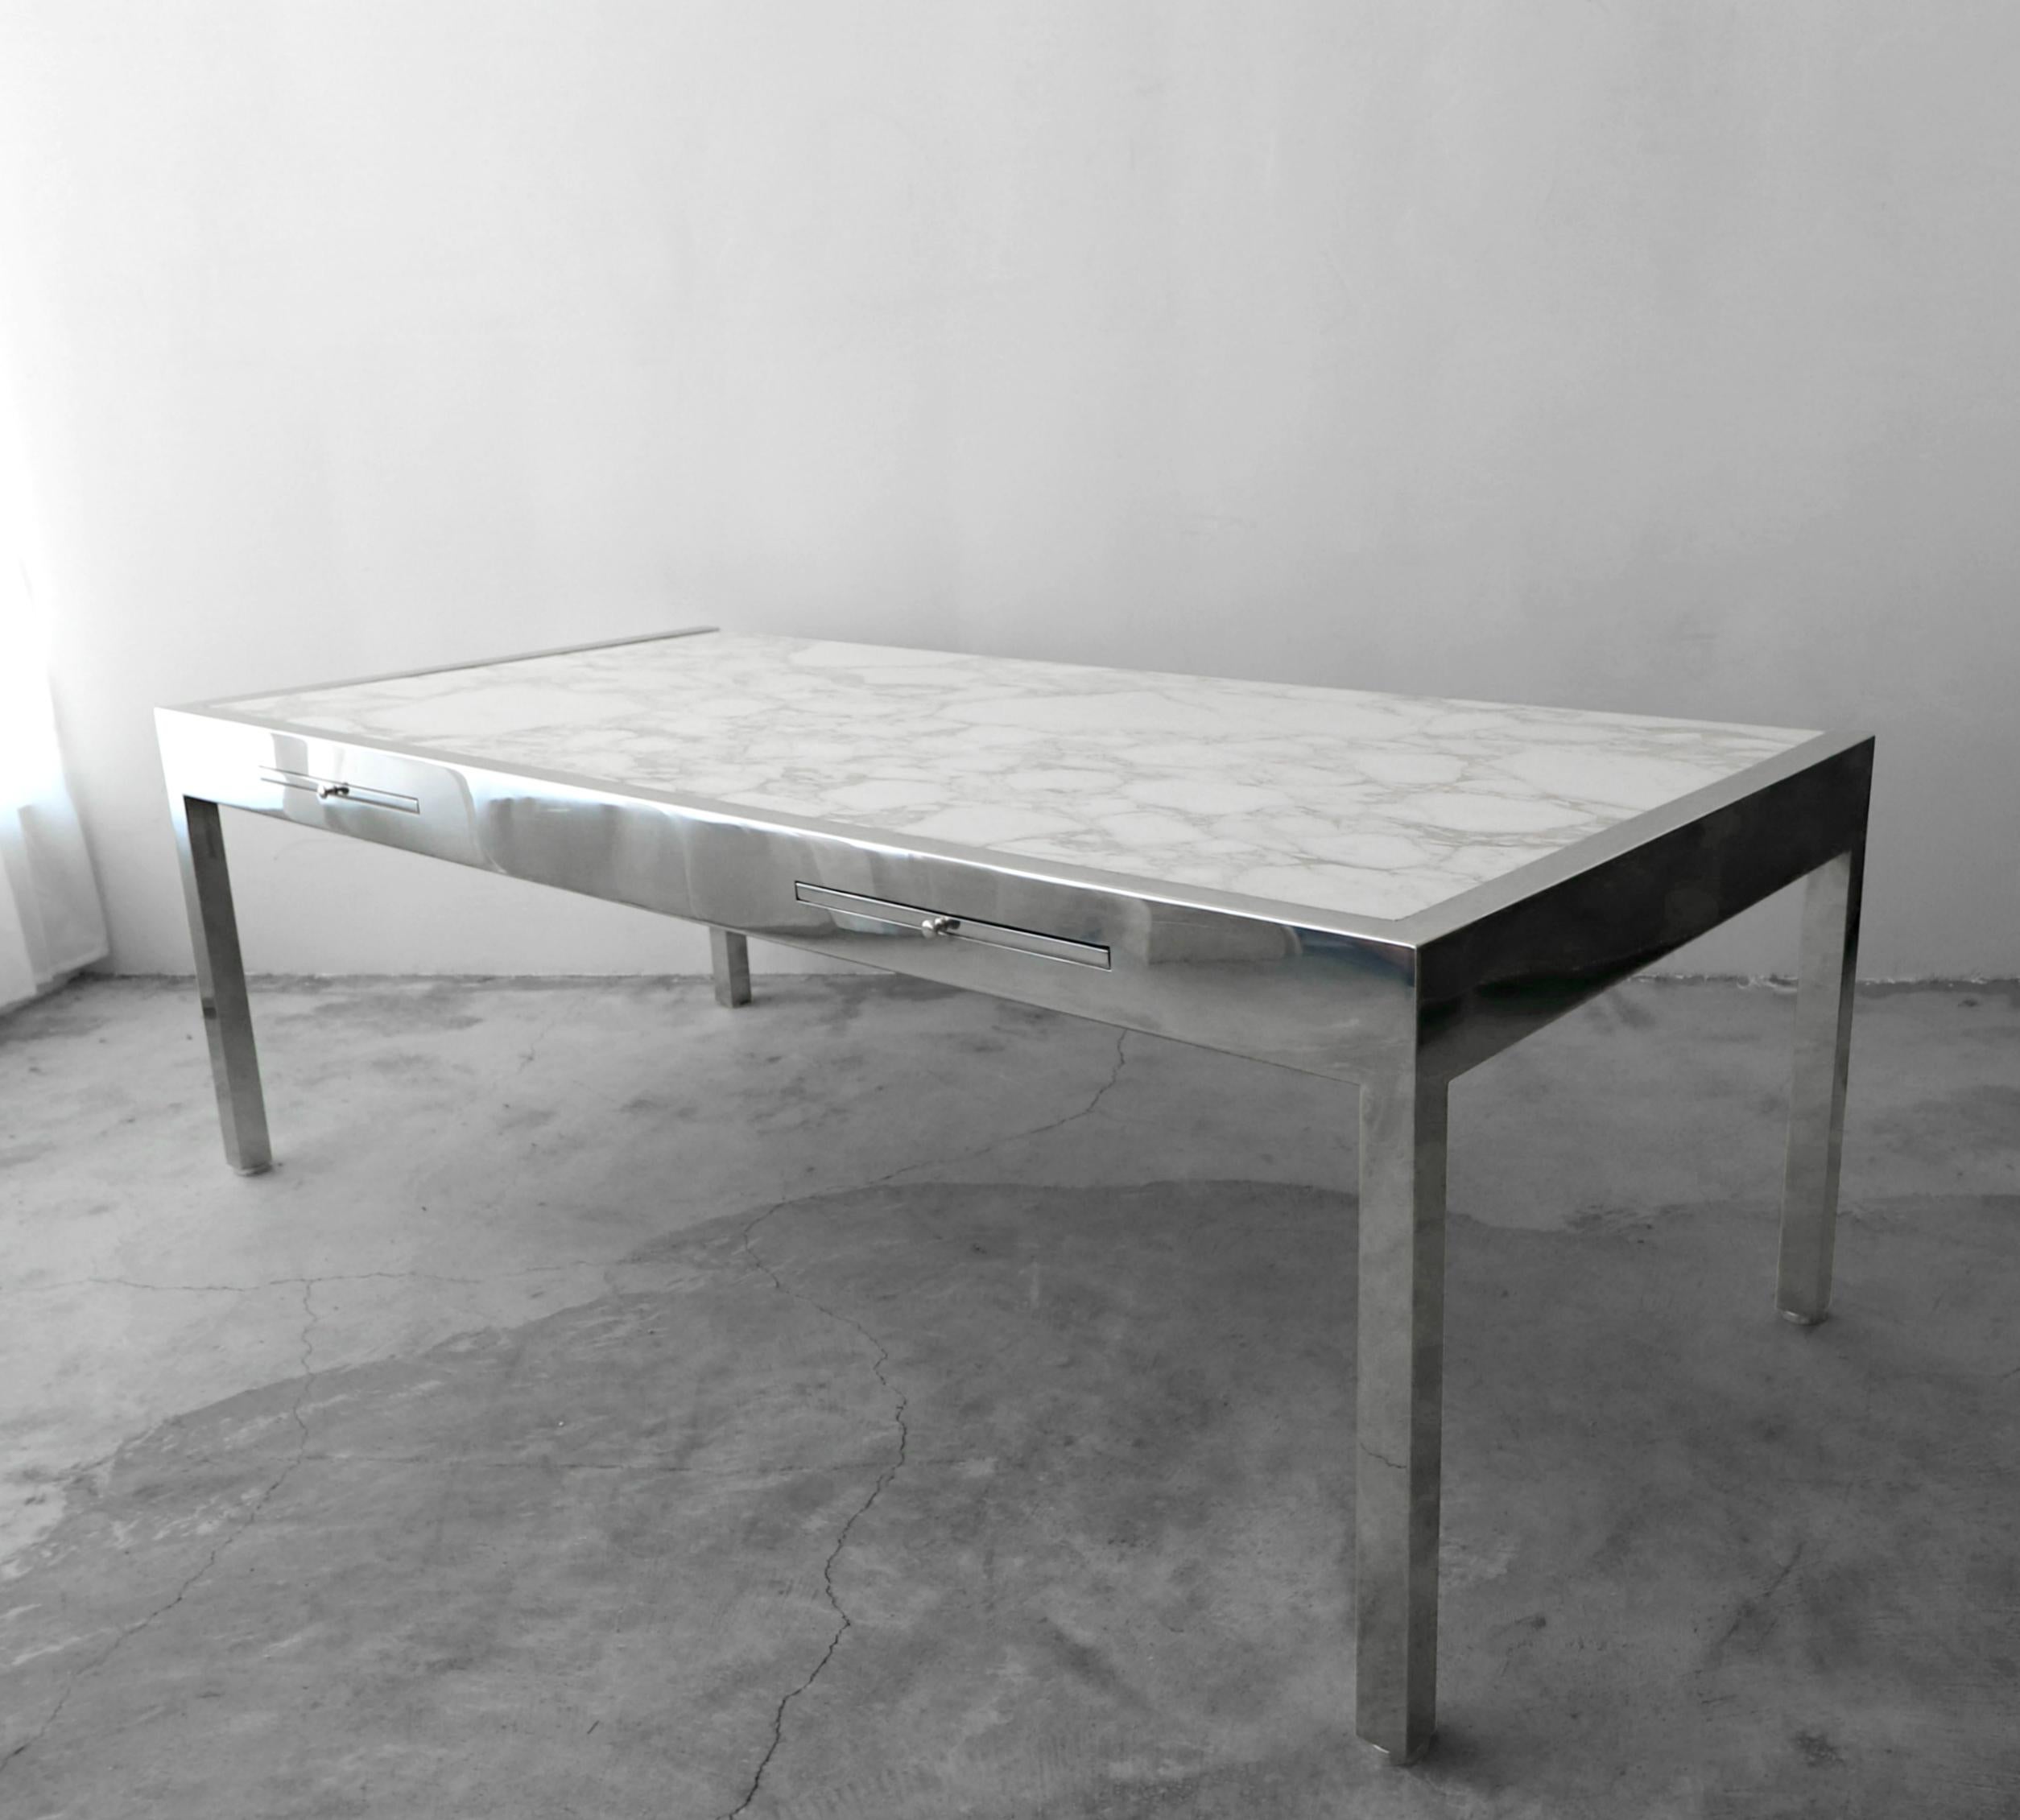 Massive 7 foot modernist desk by Leon Rosen for Pace. I have never seen this combination of finishes on this desk before. Purchased from the original owner, a local Las Vegas Real Estate Developer, he said he custom ordered it in the 1970s.

This